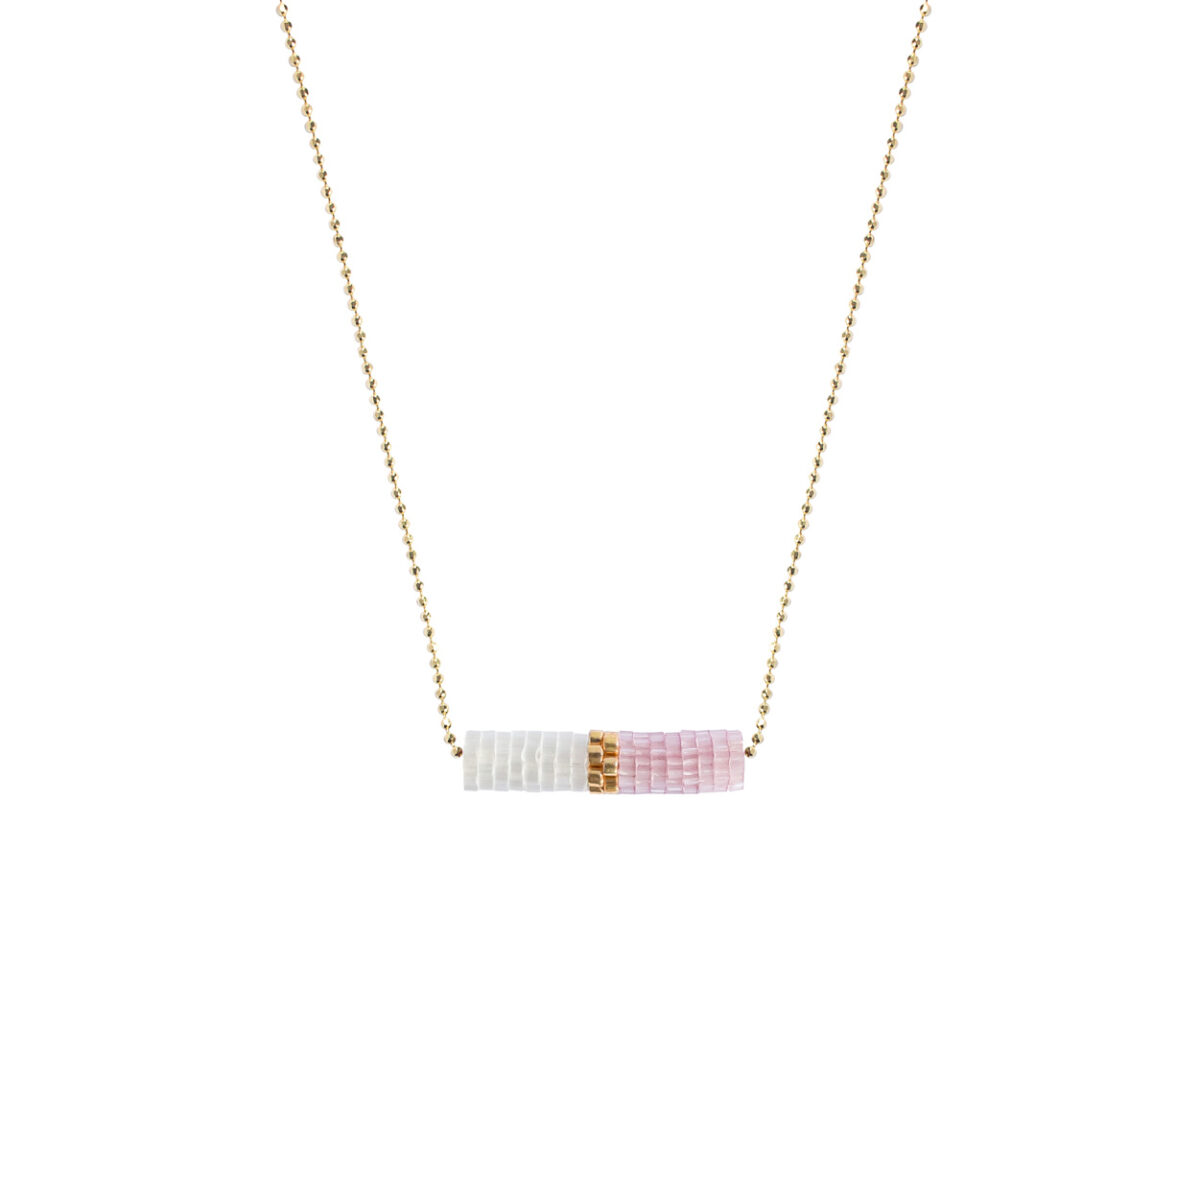 Elegant white and pink beaded necklace with a gold plated on silver chain.